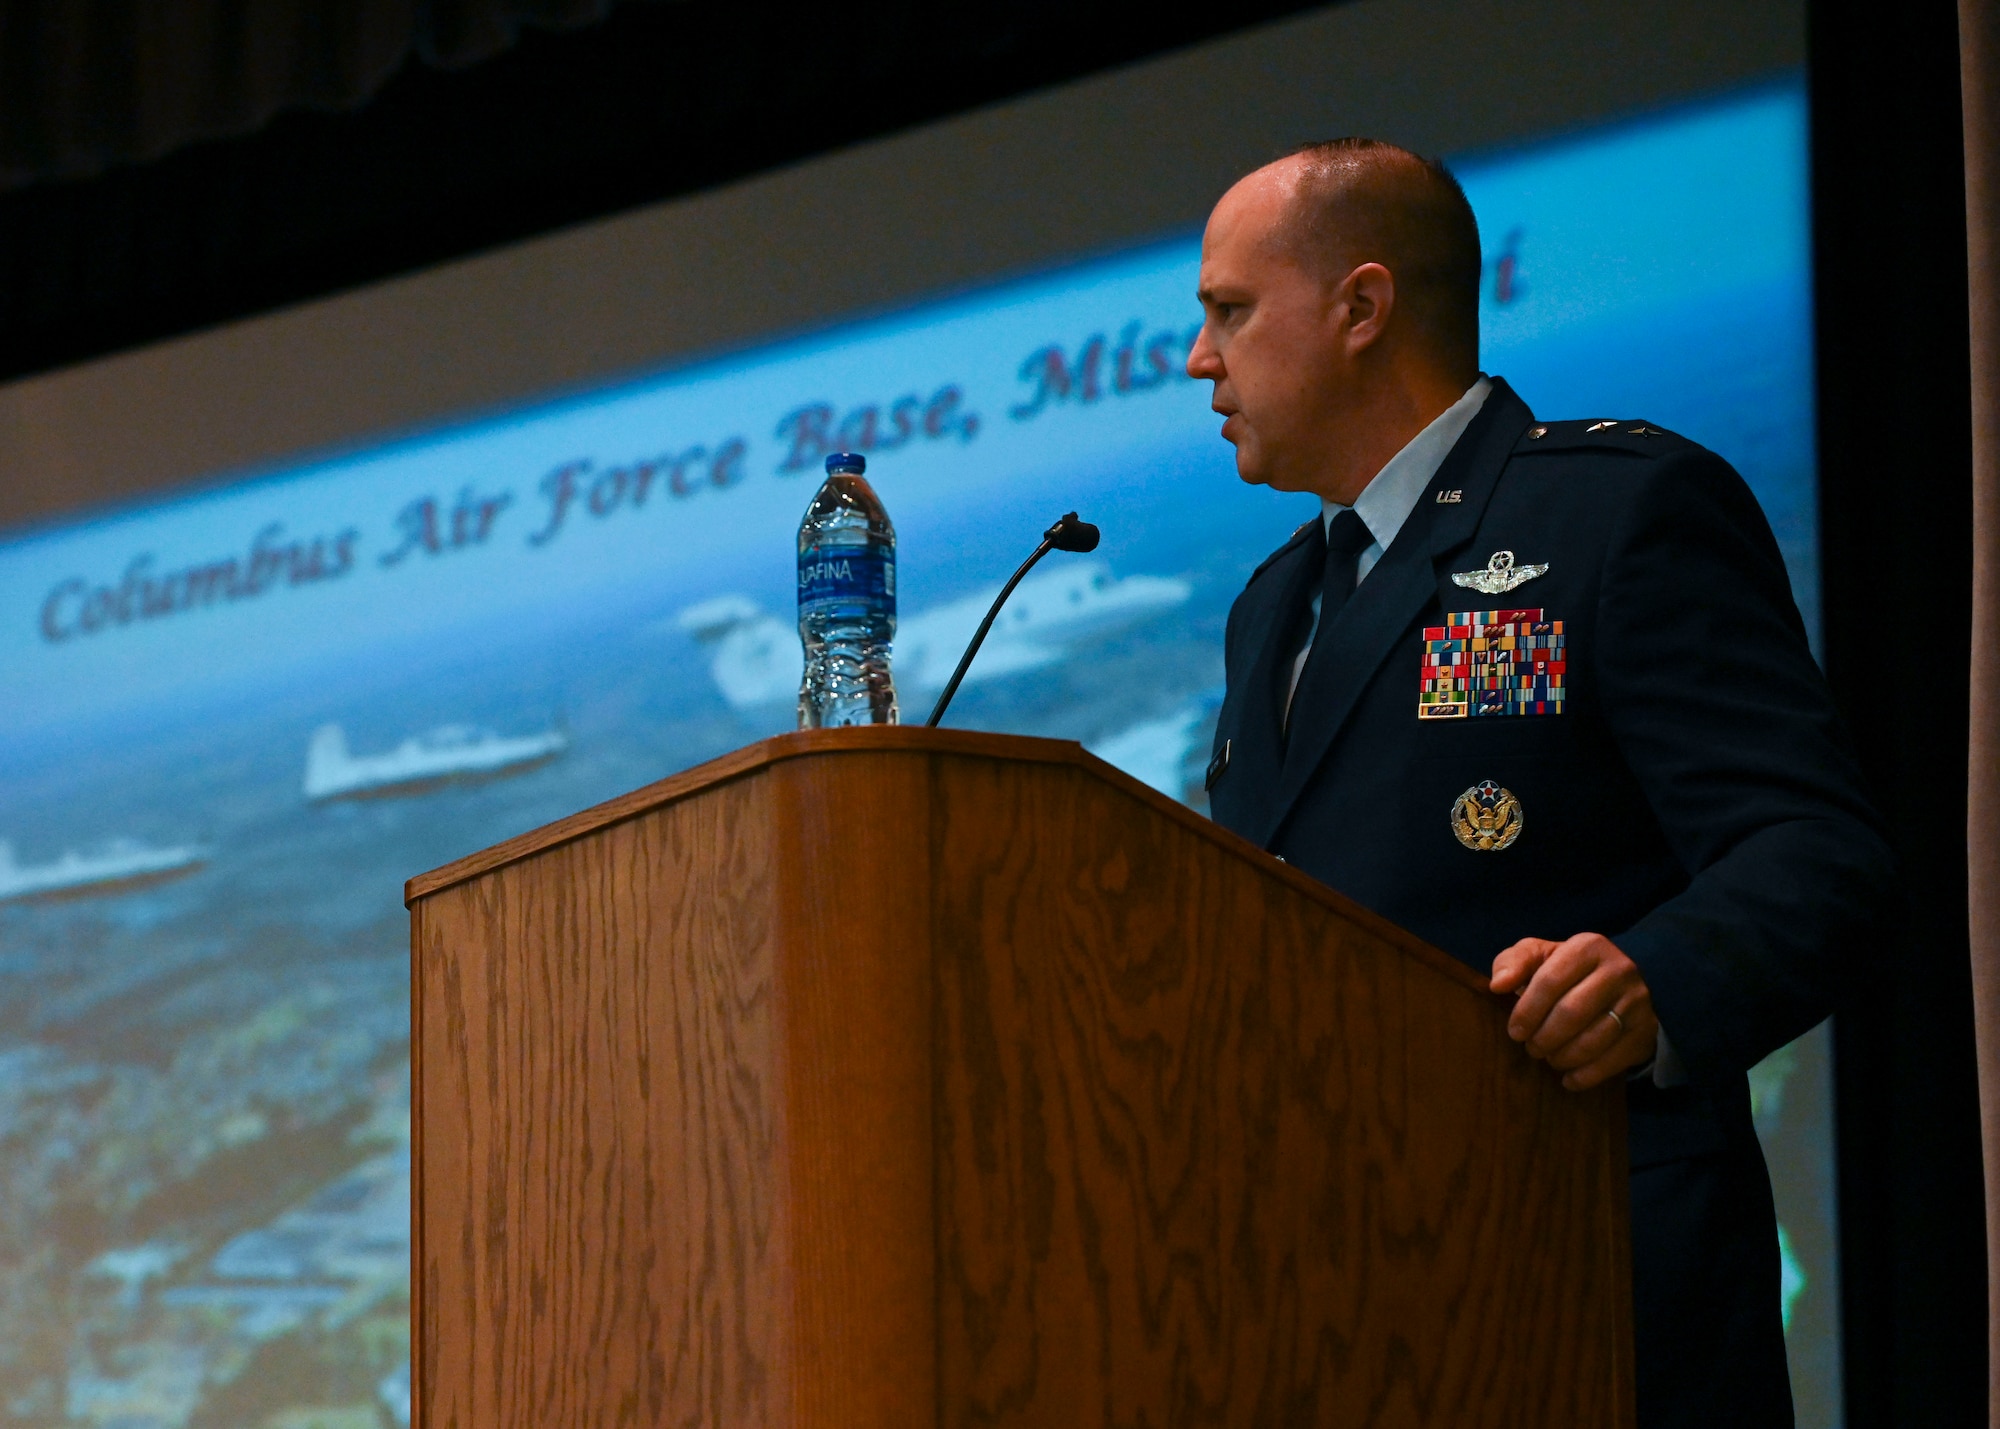 U.S. Air Force Maj. Gen. John Nichols, Global Power Programs, Office of the Assistant Secretary of the Air Force for Acquisition, Technology and Logistics, director, the Pentagon, Arlington, Virginia, delivers the graduation speech to Specialized Undergraduate Pilot Training class 22-10, May 26, 2022, on Columbus Air Force Base, Miss. During SUPT student pilots train in the T-6A Texan II and T-1A Jayhawk or T-38C Talon.  (U.S. Air Force photo by Airman 1st Class Jessica Haynie)